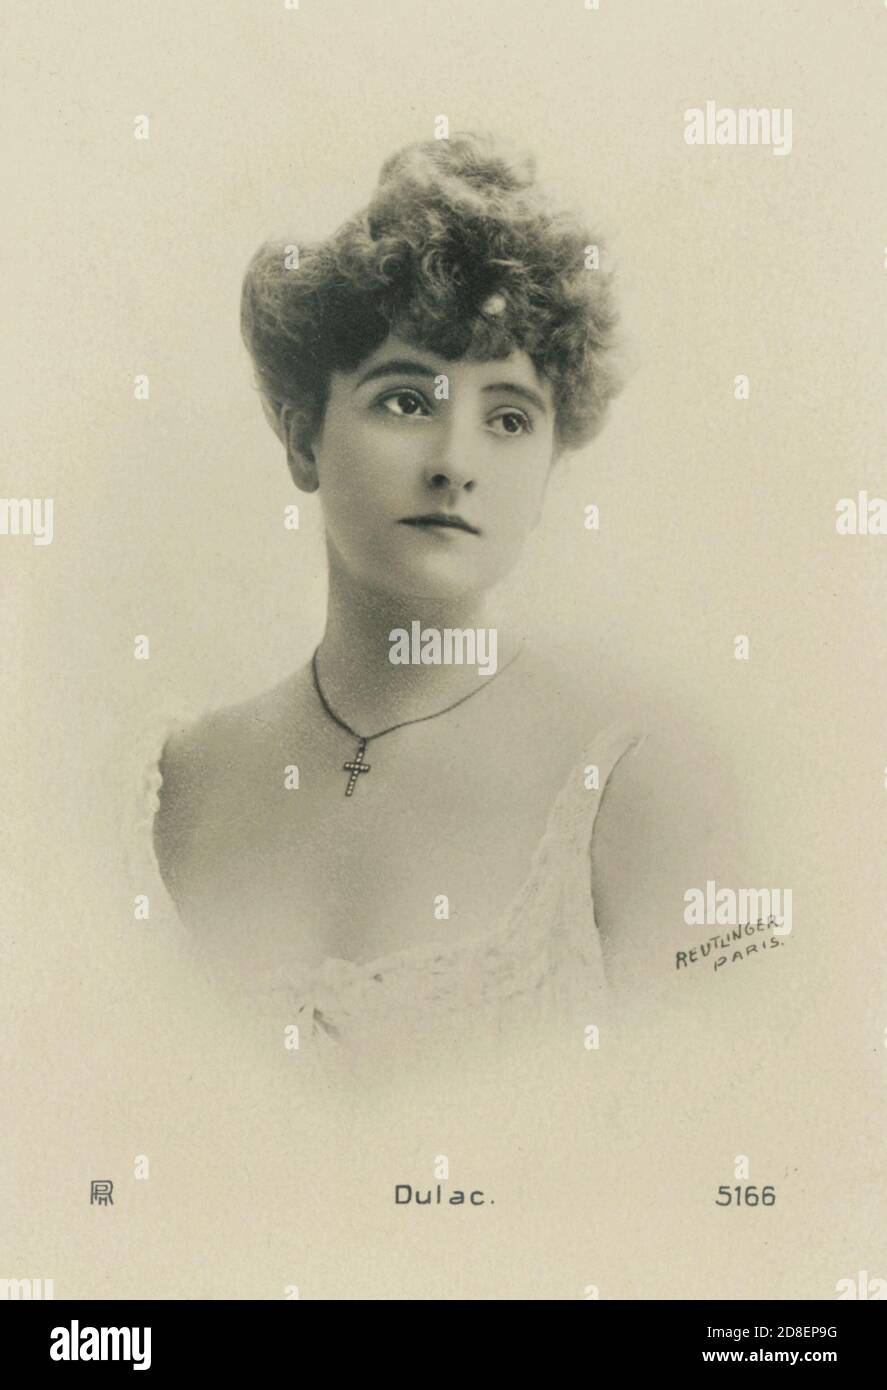 Vintage Postcard. Odette Dulac (French actress) - Rotophot (Berlin) 5166 (postcard) c 1903 - photo by Reutlinger (Paris) - restored from original postcard by Montana Photographer. Stock Photo